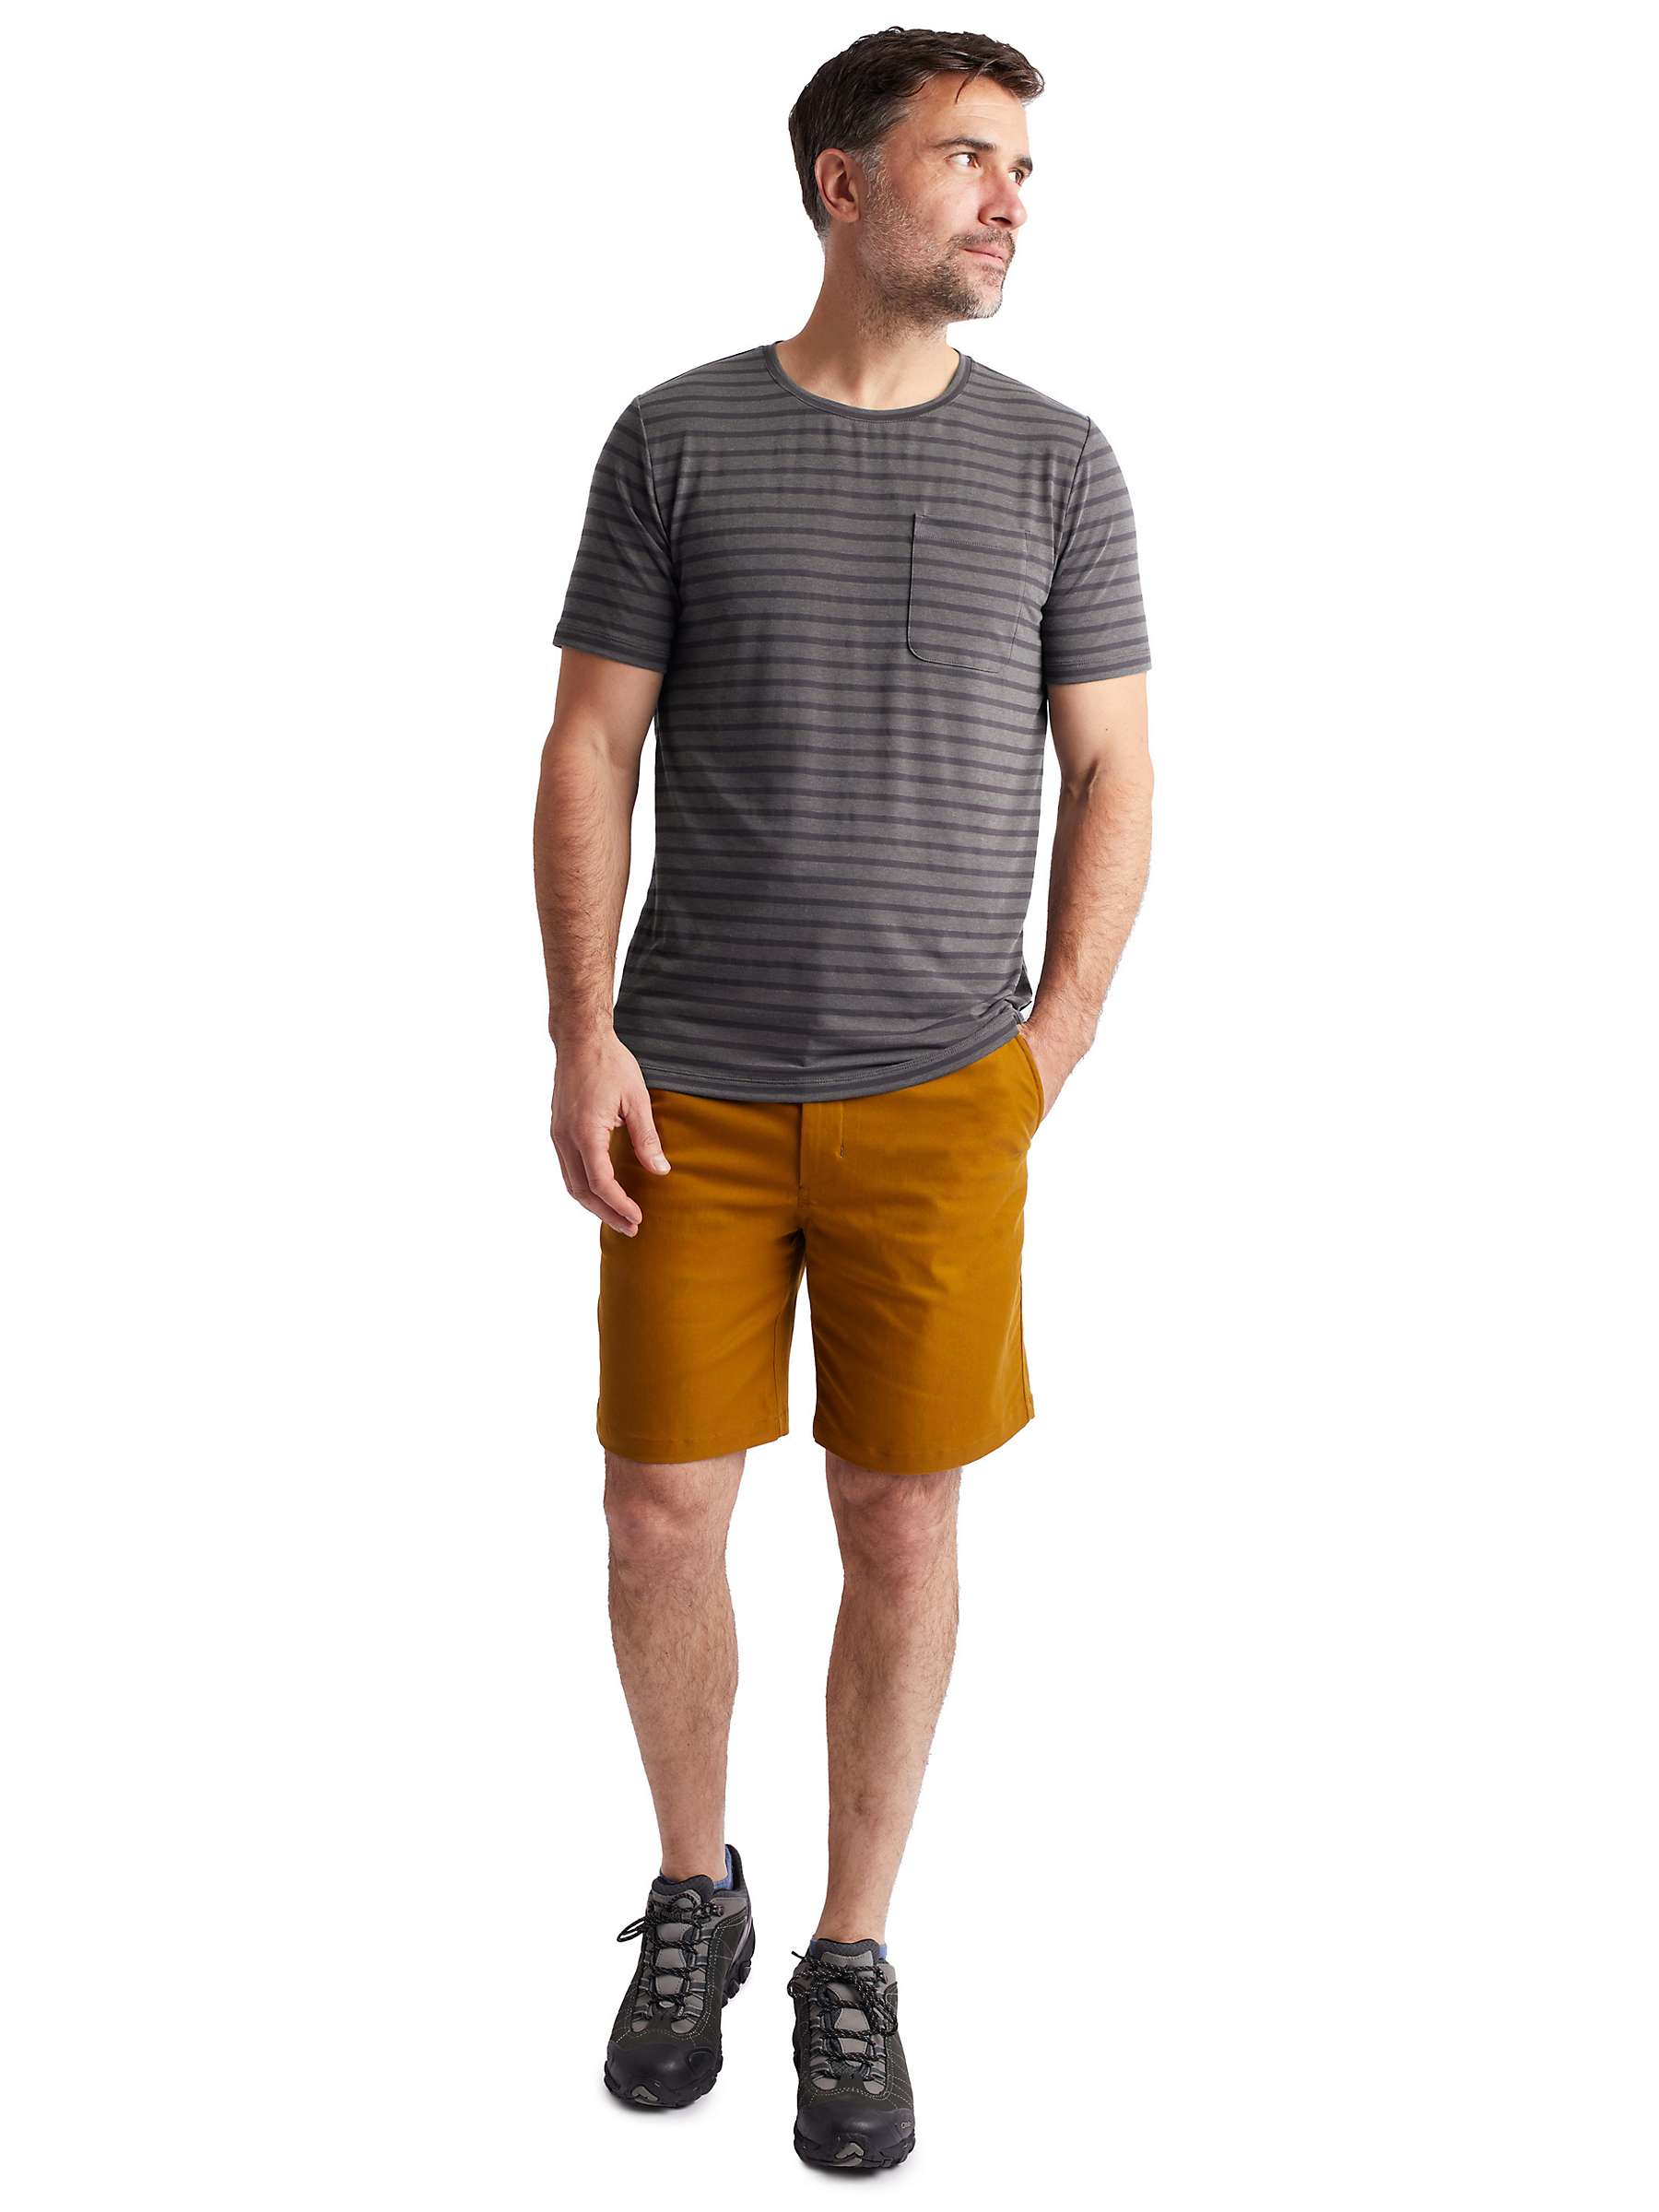 Buy Rohan Harbour Stretch Stripe Short Sleeve T-Shirt, Stormy Grey Online at johnlewis.com